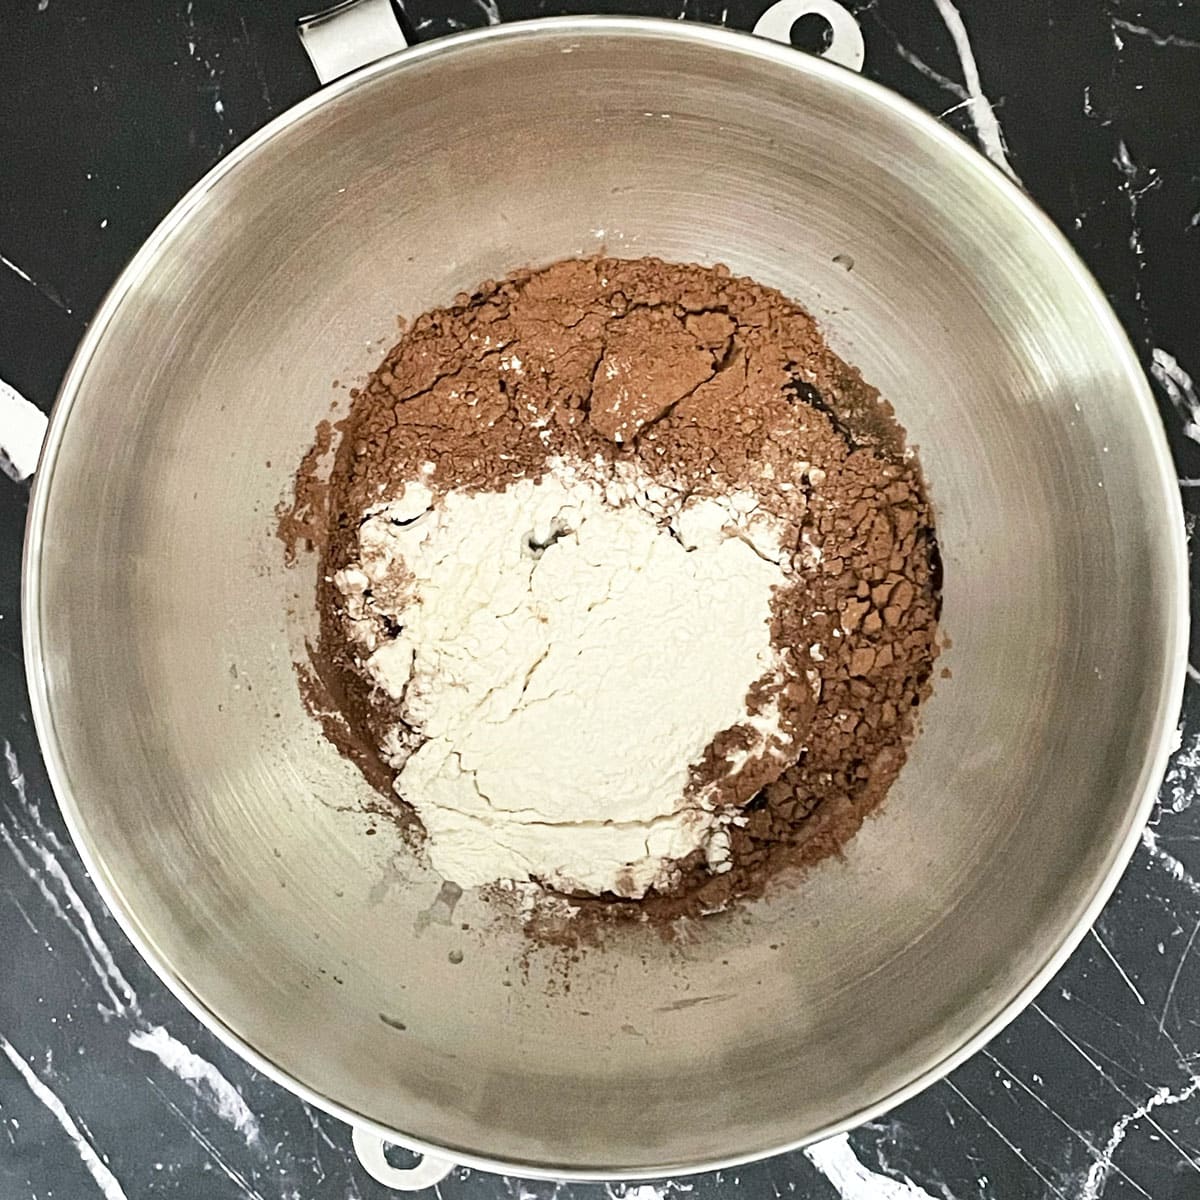 Chocolate cake wet and dry ingredients in mixer bowl.